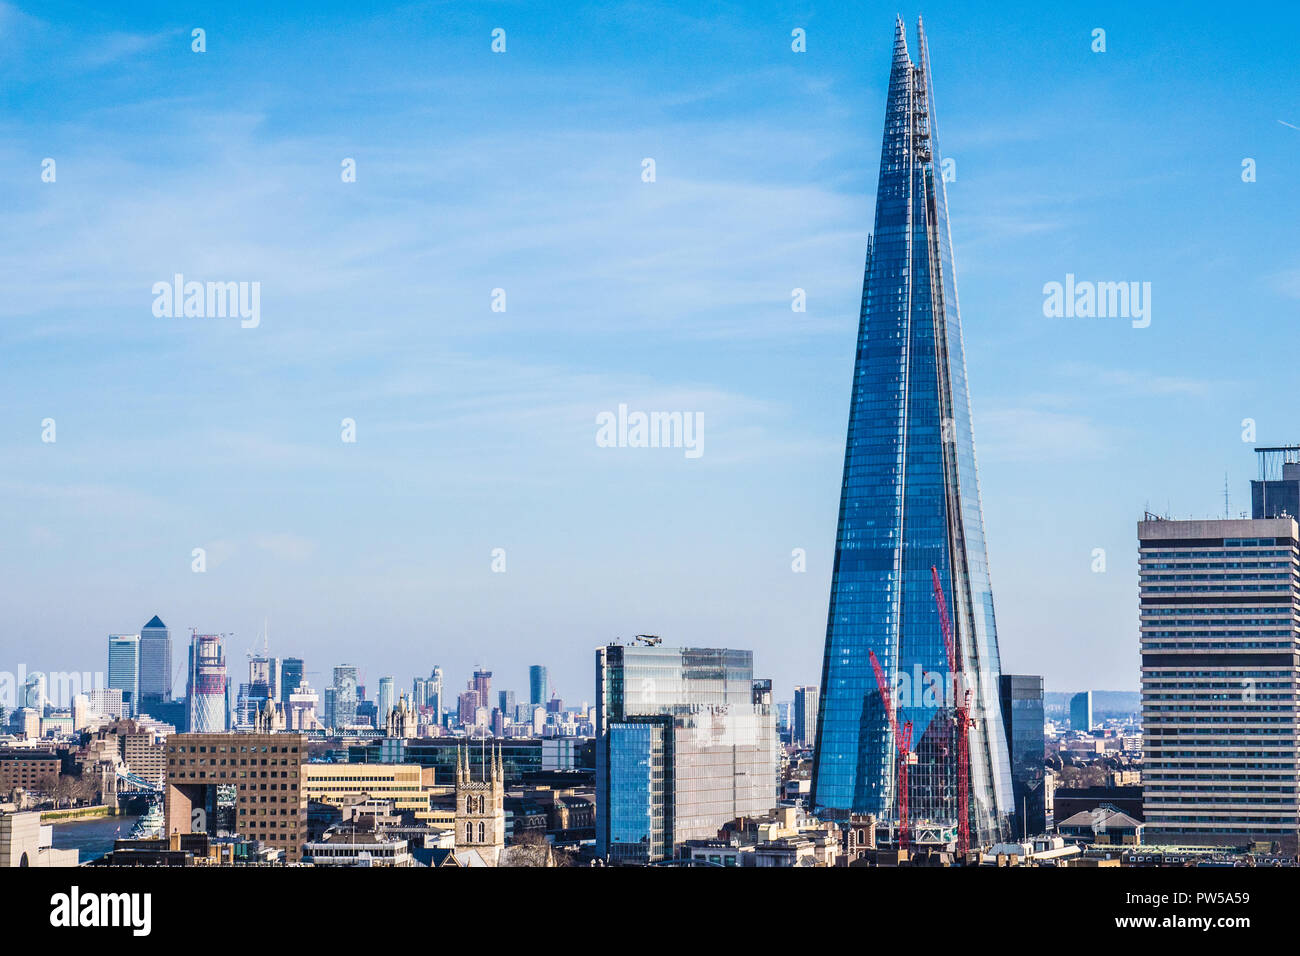 The London skyline with the iconic Shard building seen from the Tate Modern. Stock Photo